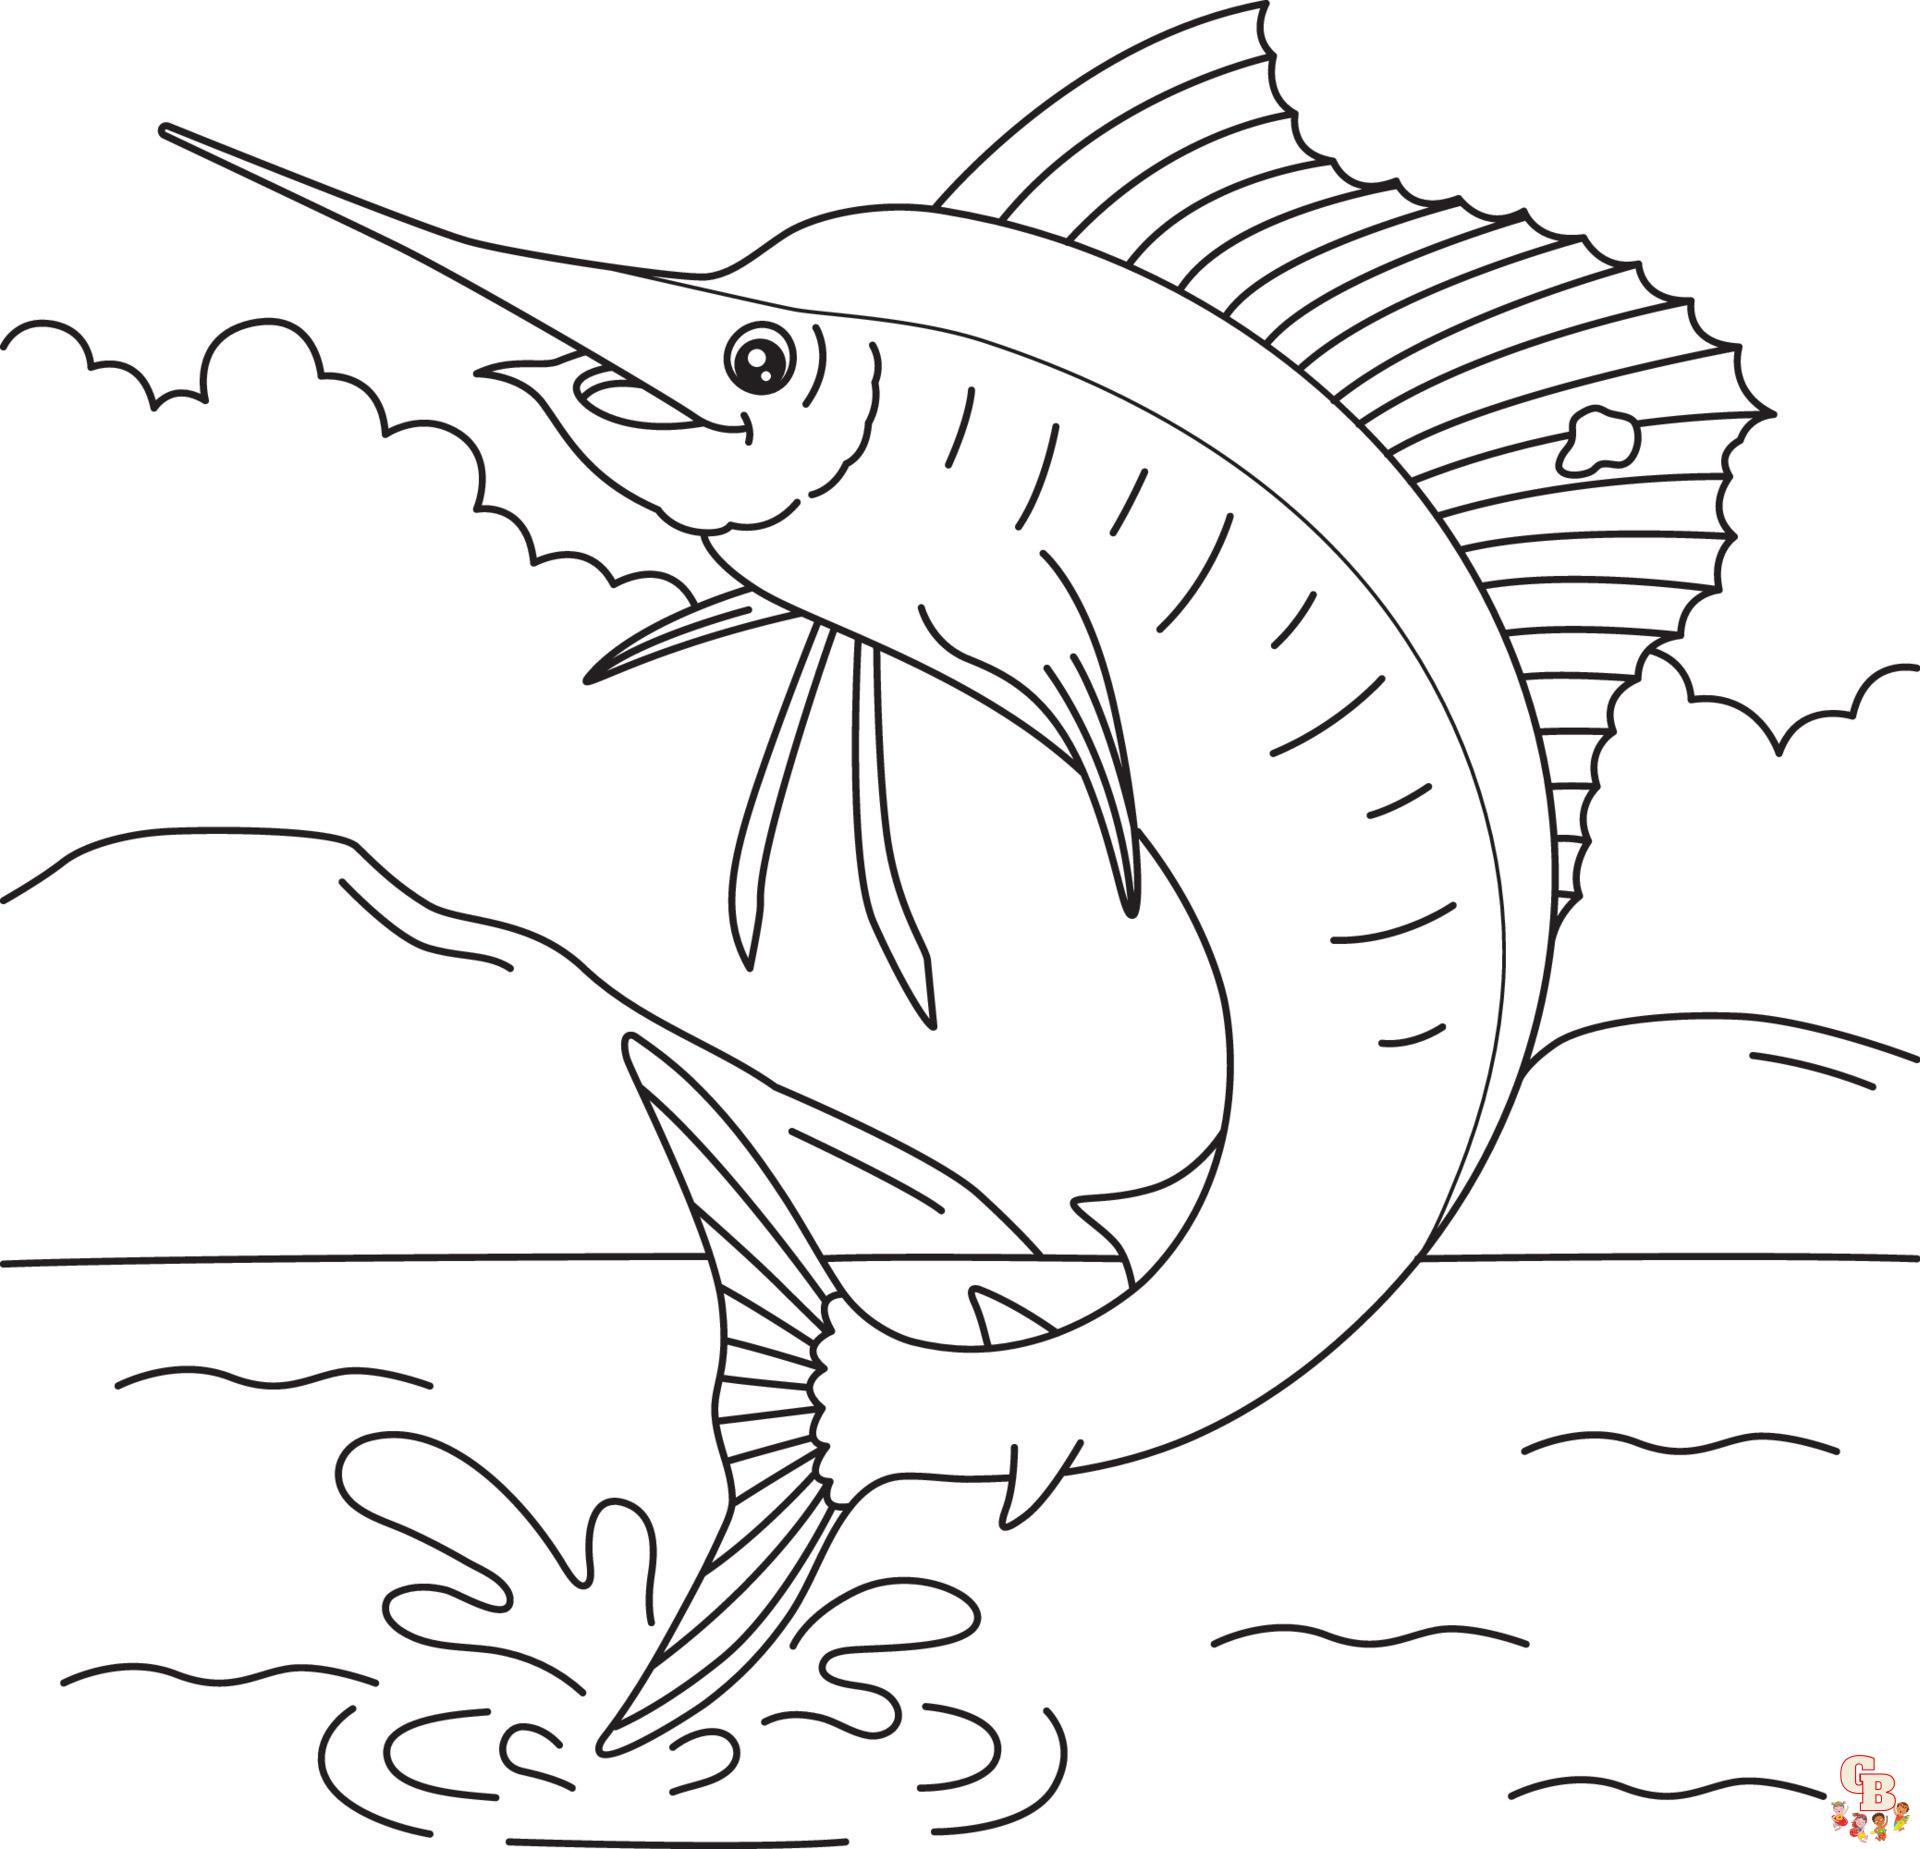 Swordfish Coloring Pages 6